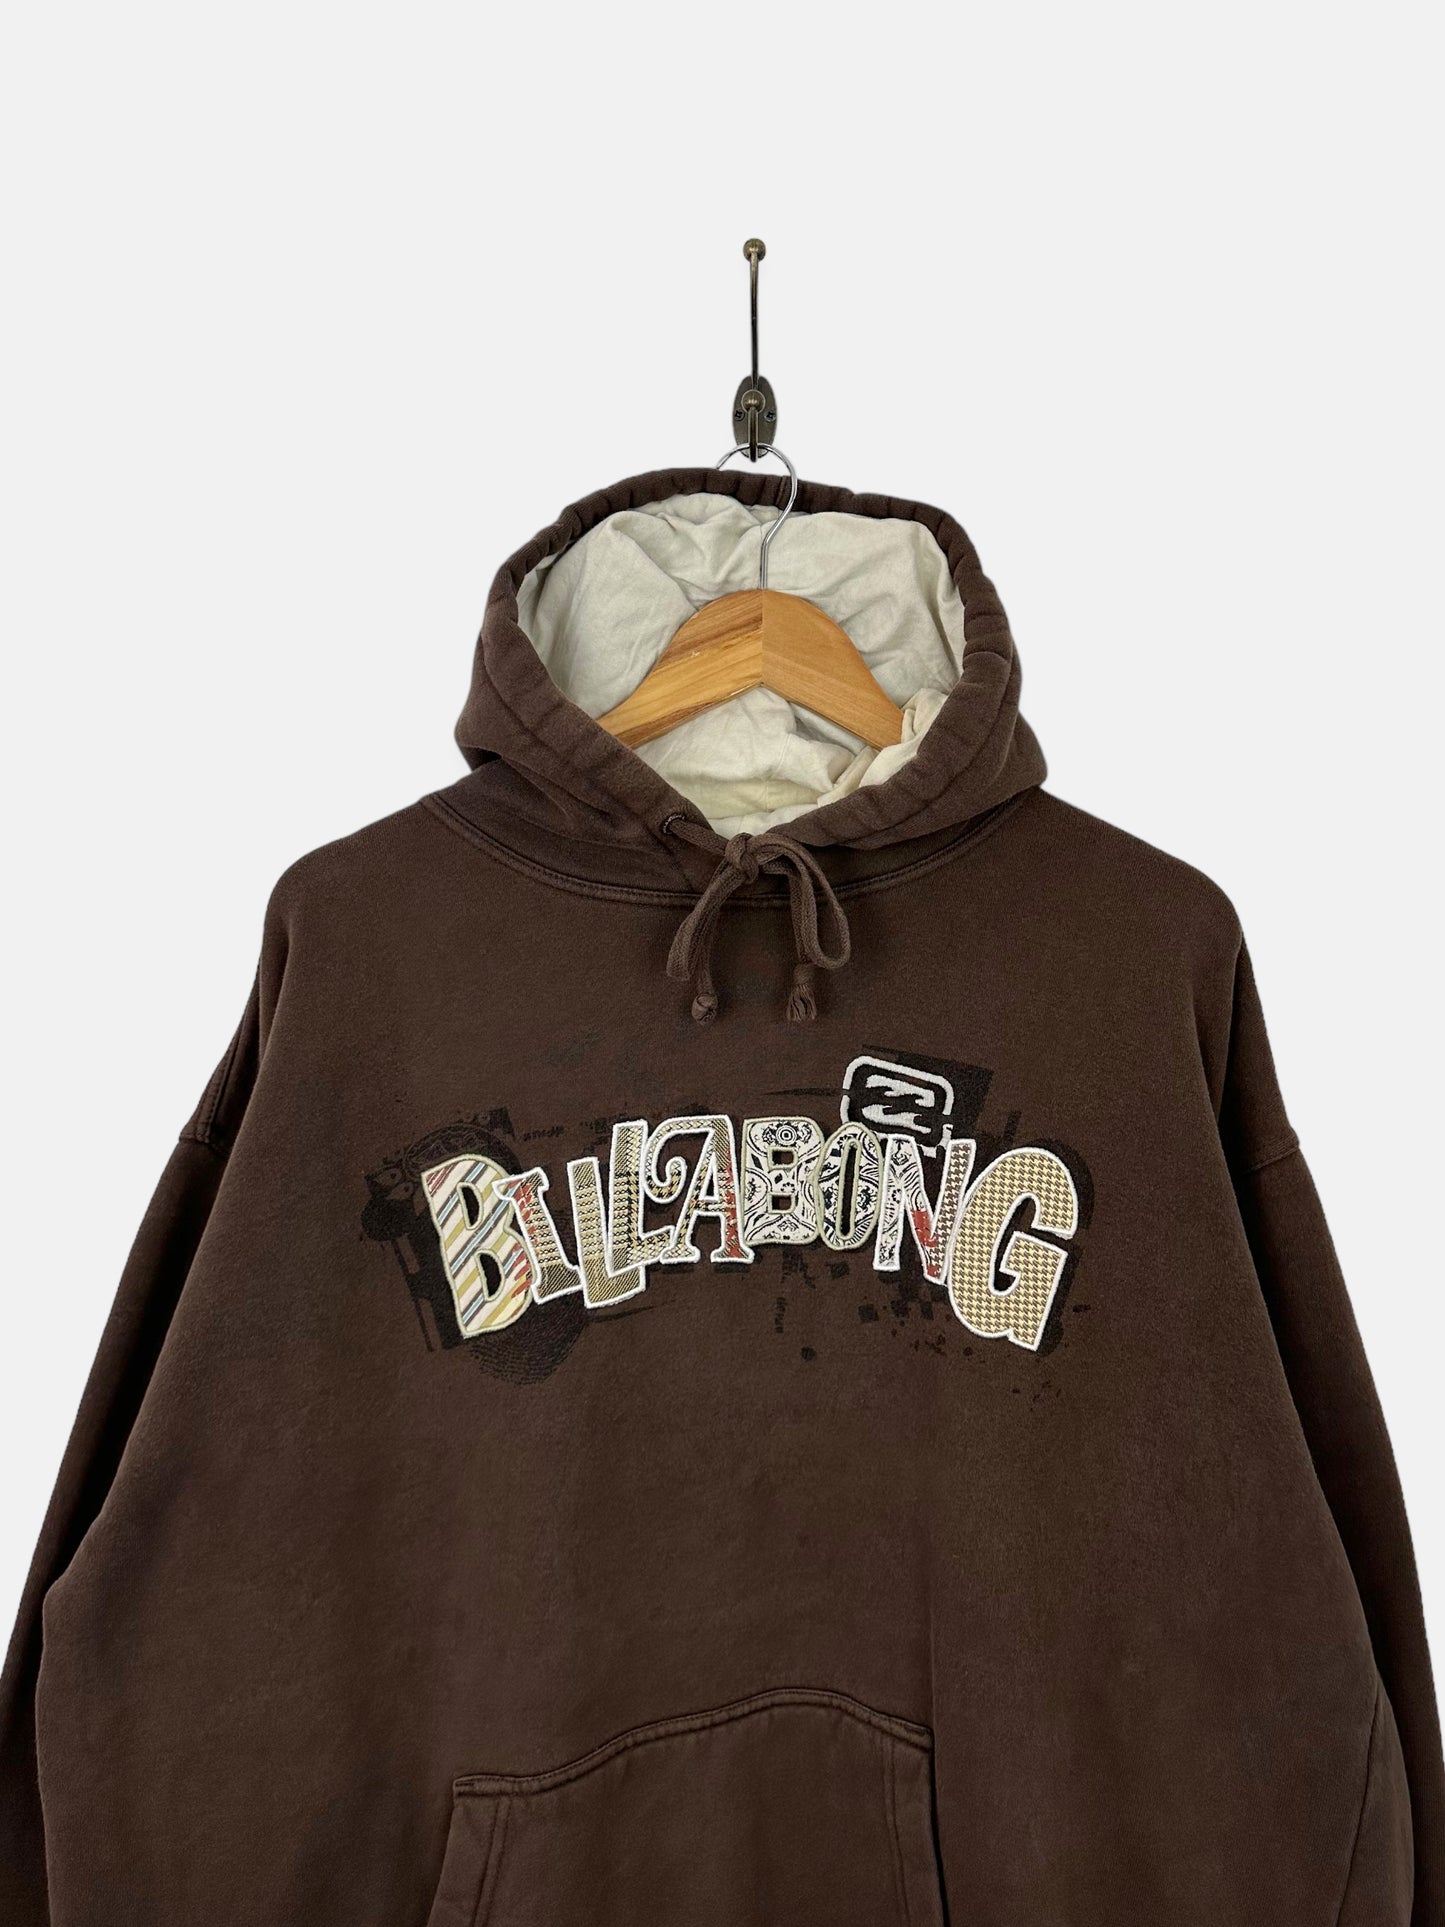 90's Billabong Embroidered Vintage Hoodie Size XL